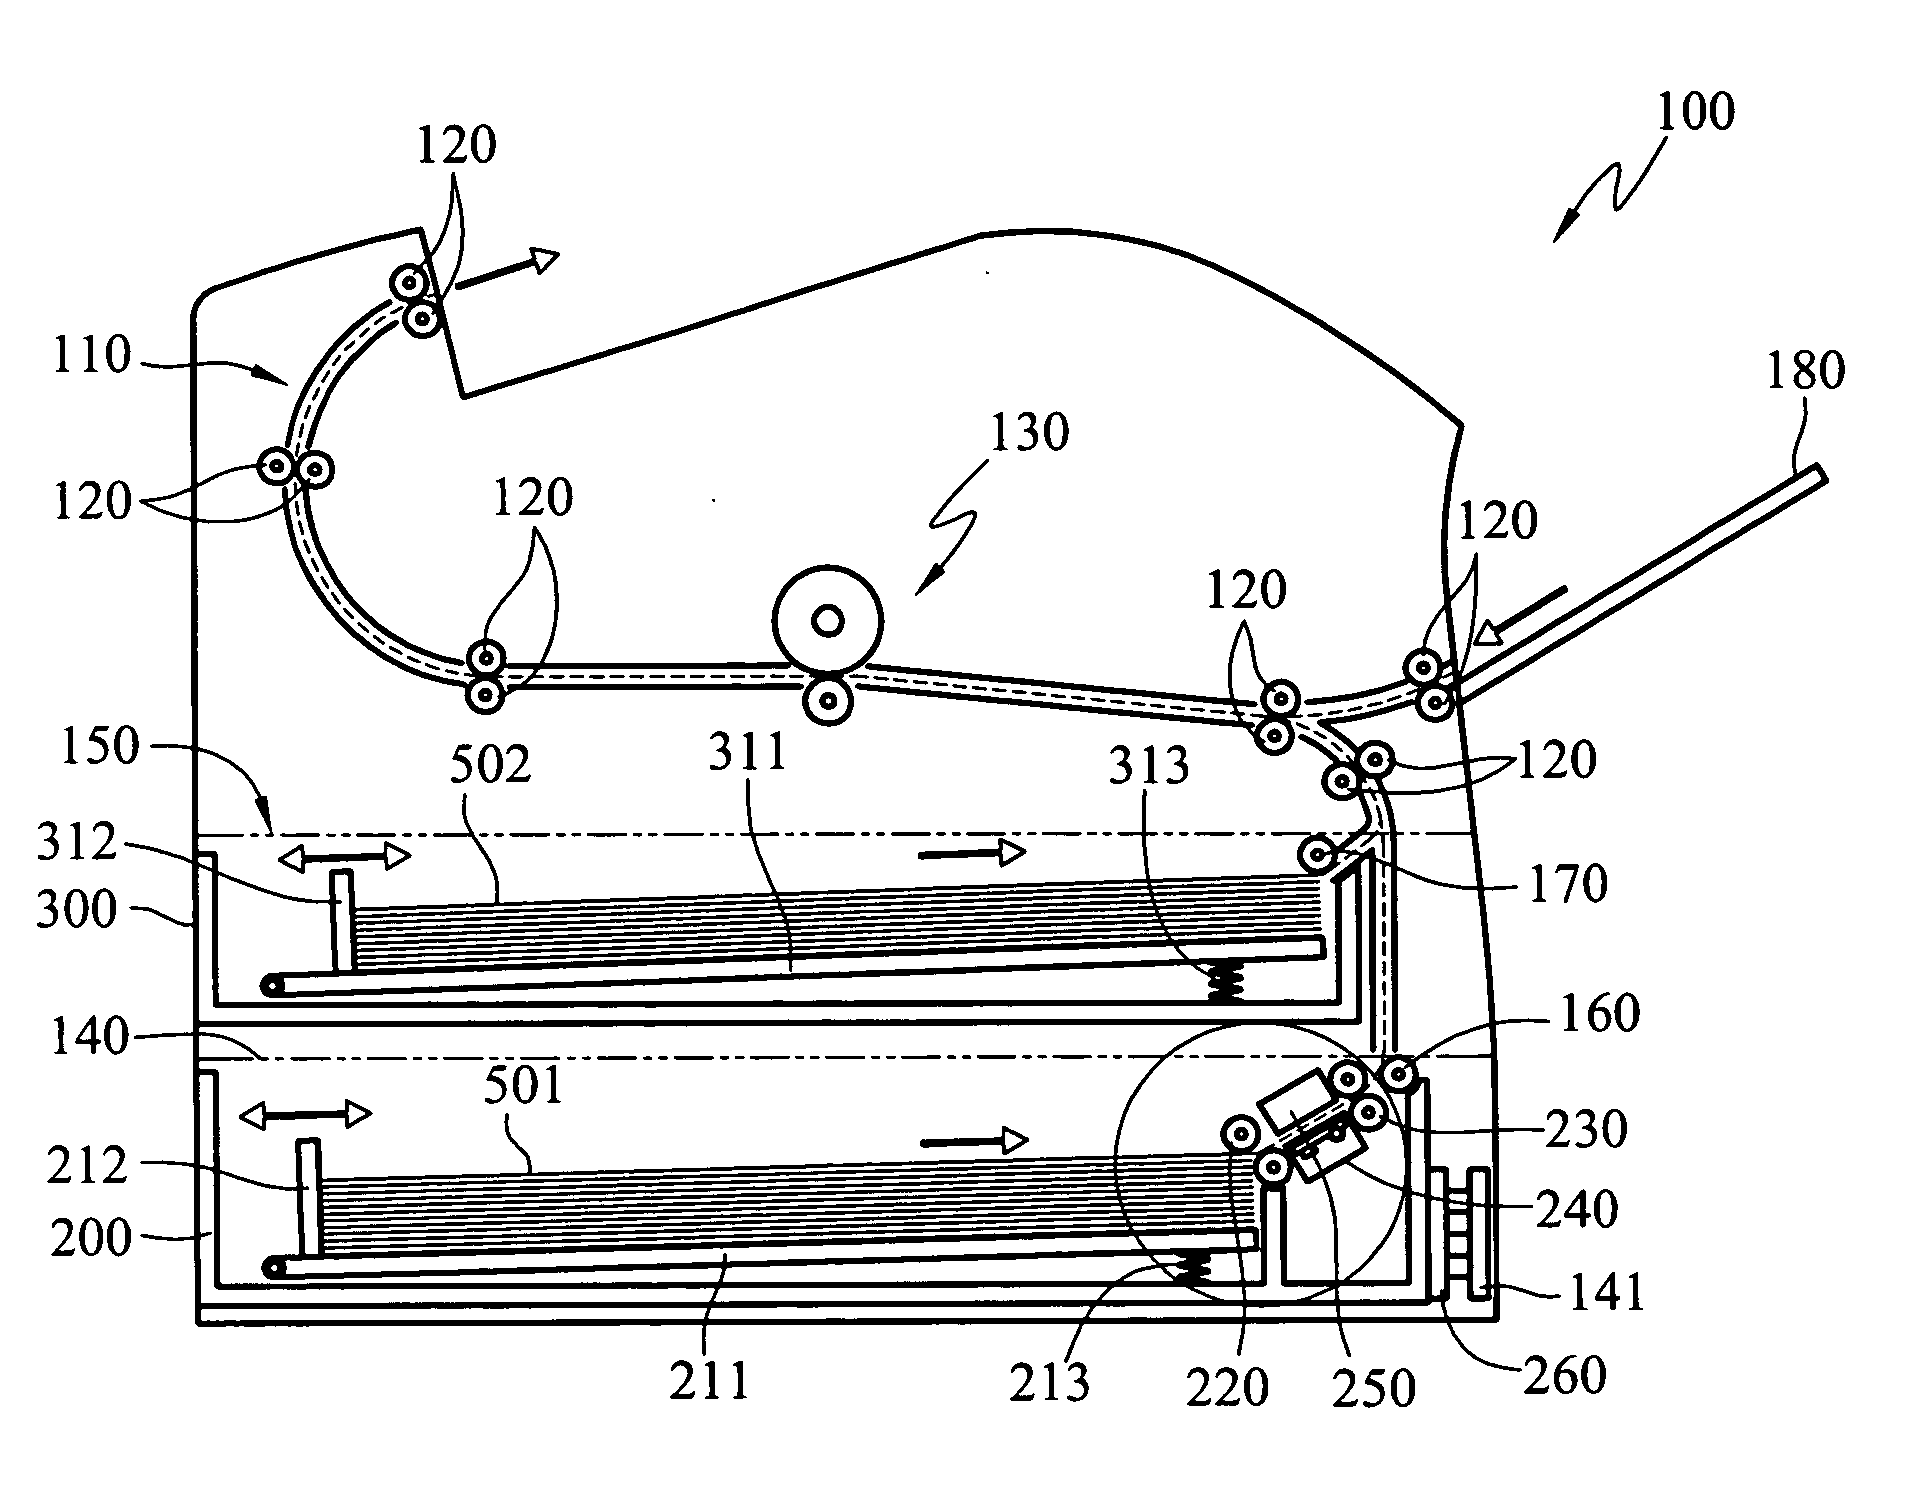 Paper feed tray with image scanning function and printer thereof